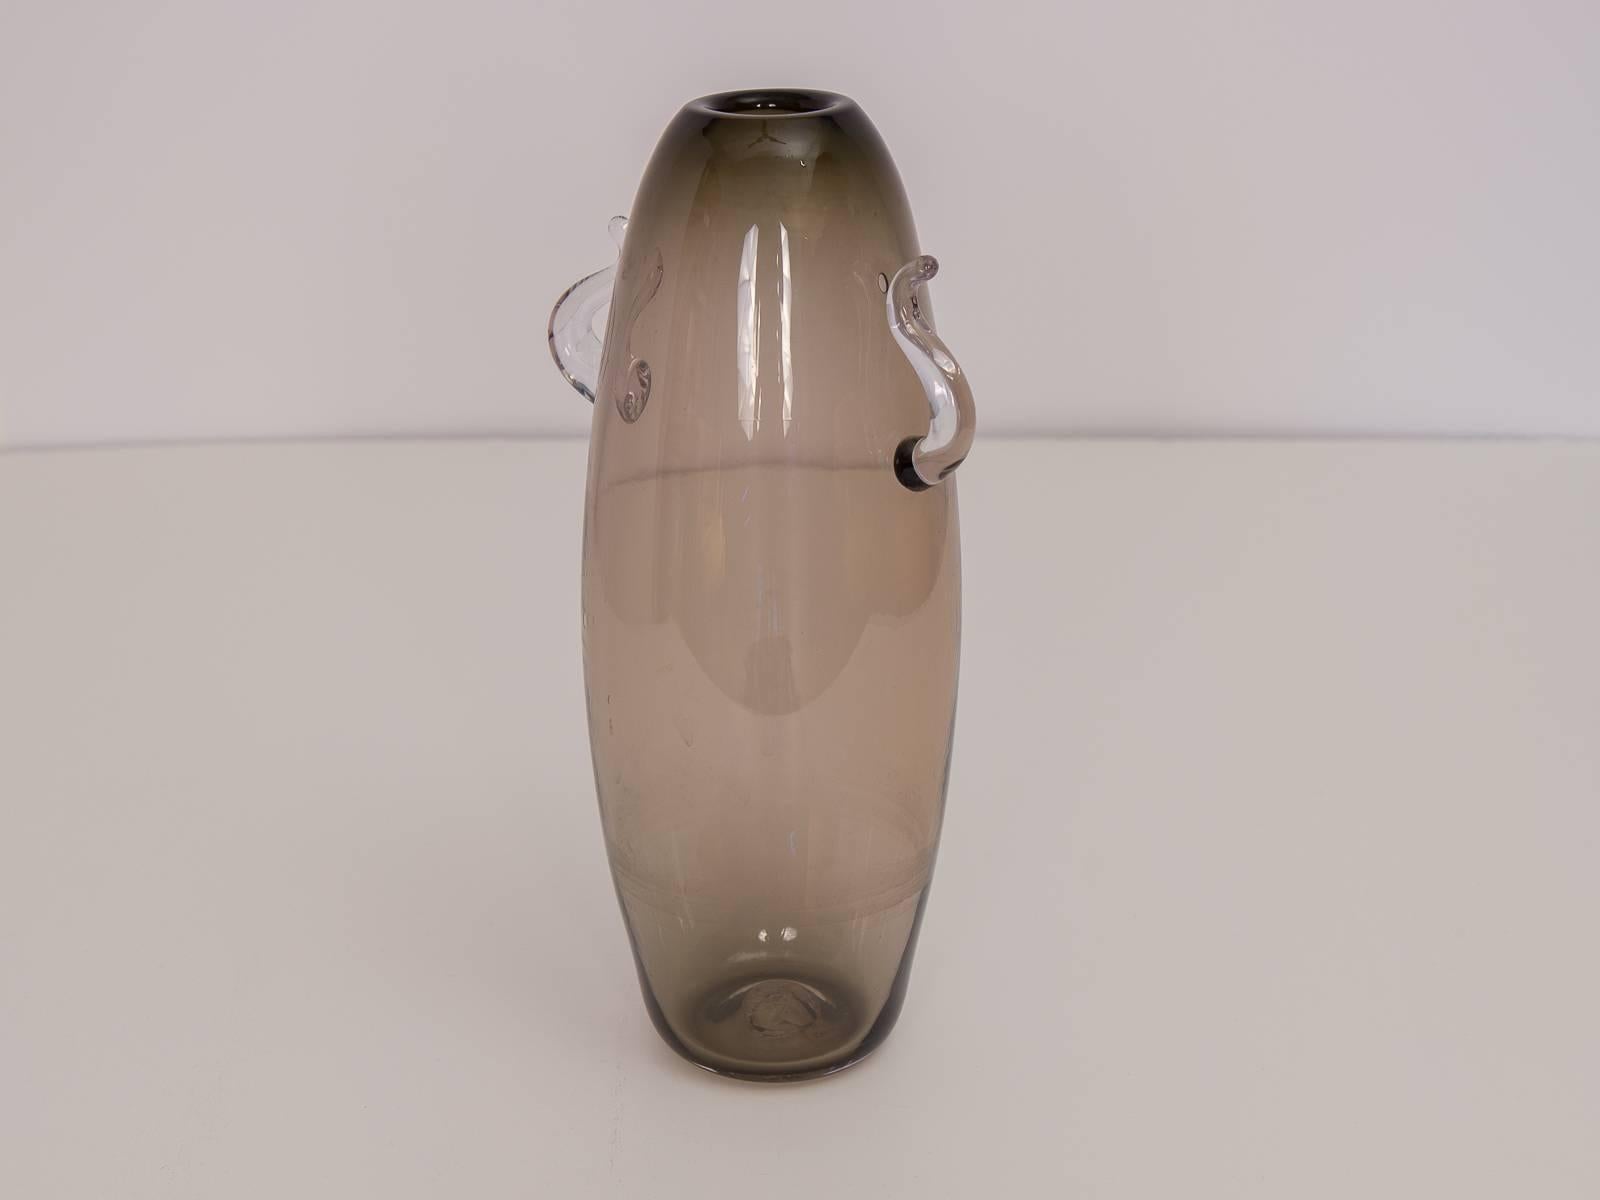 Tall Scandinavian Smoked Glass Vase In Excellent Condition For Sale In Brooklyn, NY